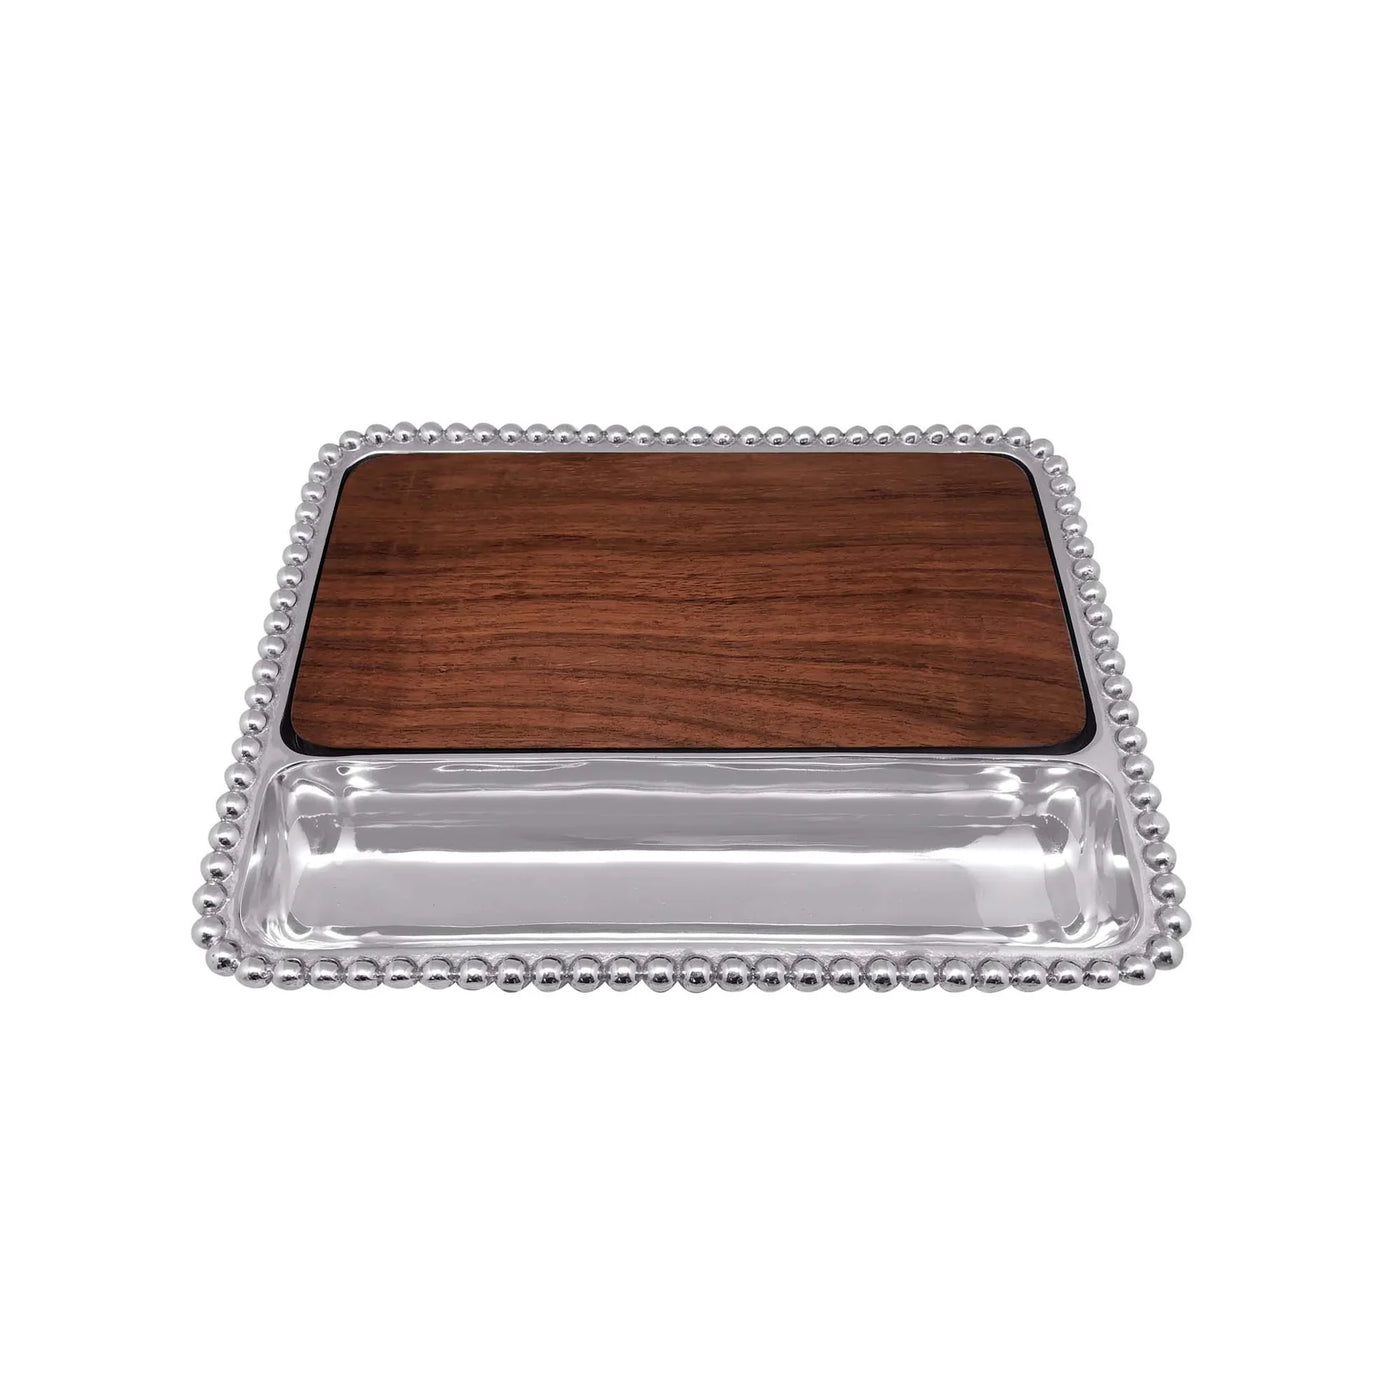 Pearled Cheese Board with Dark Wood Insert